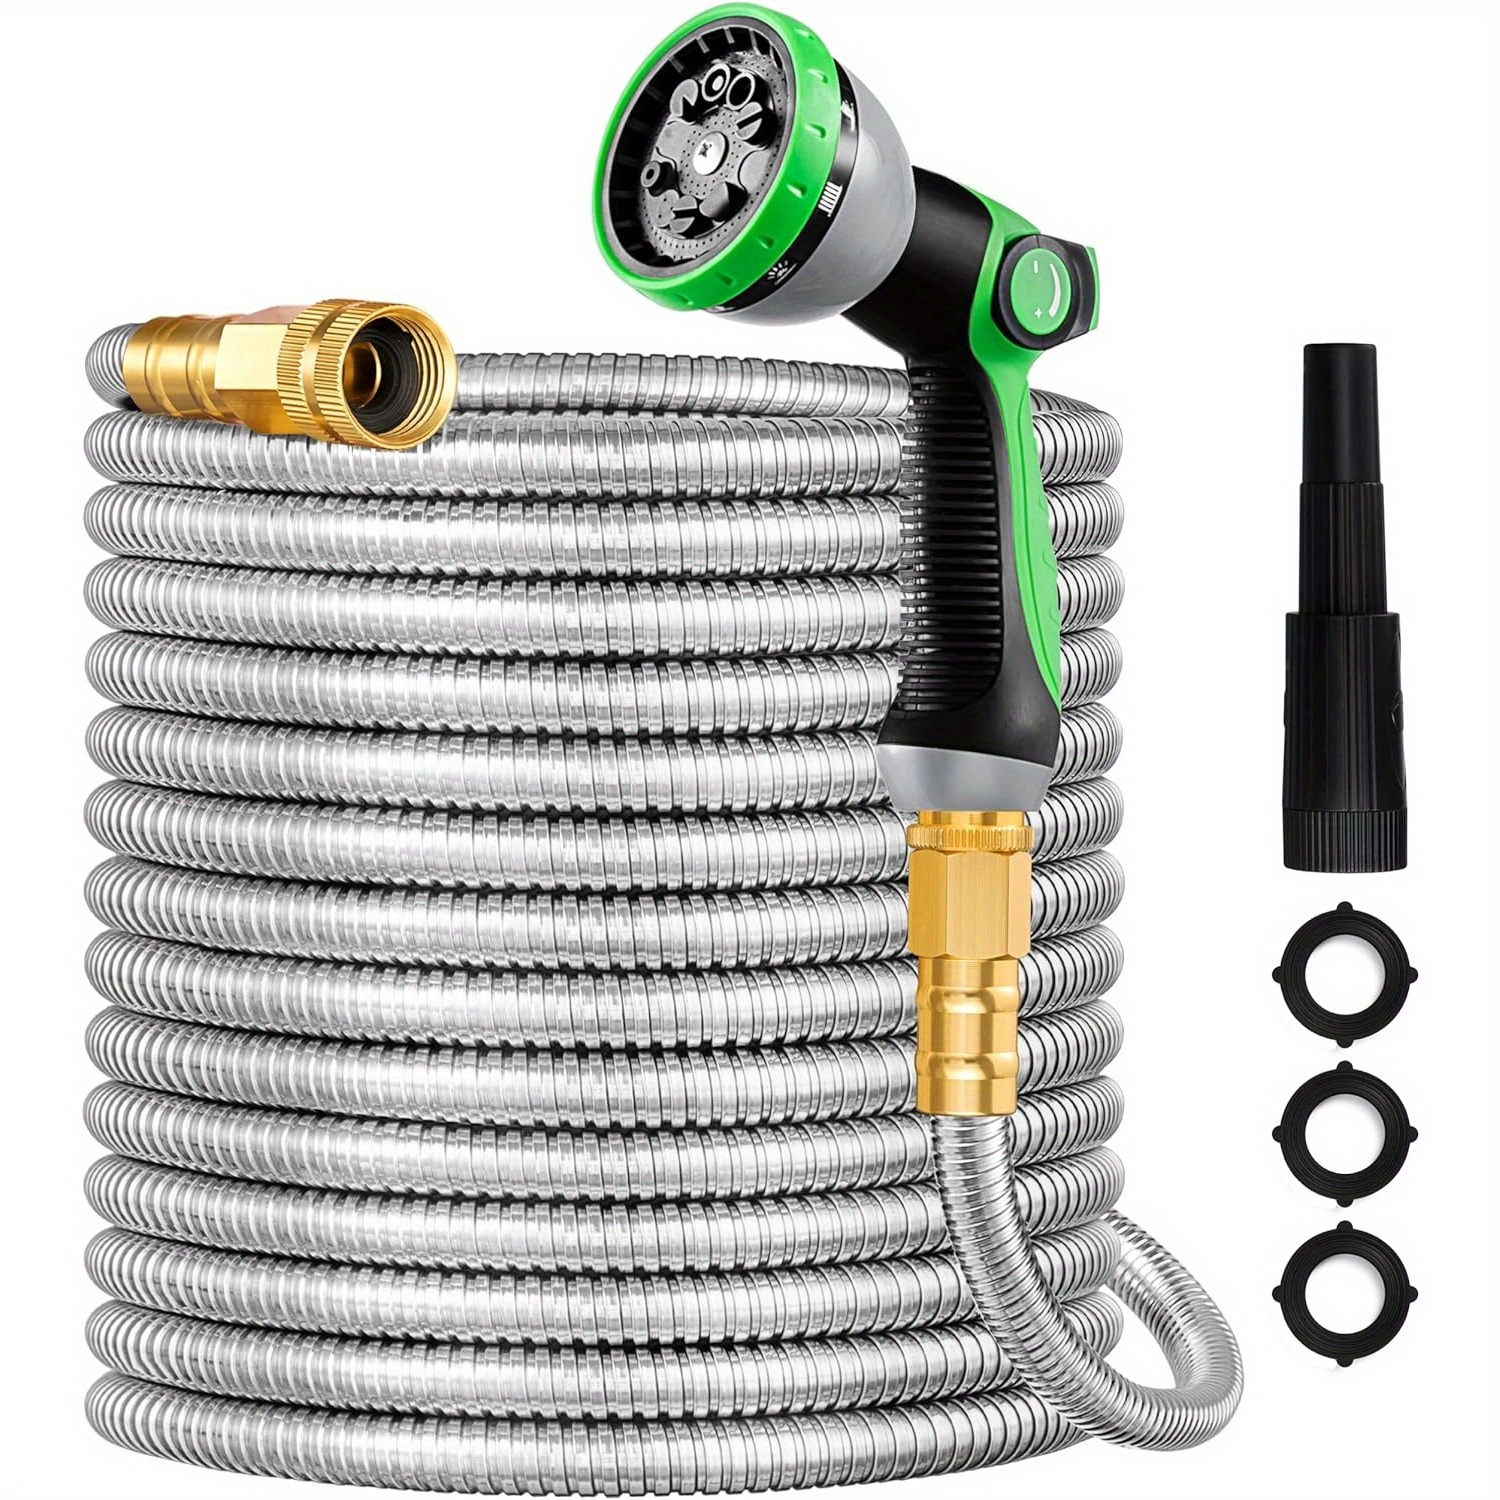 

Metal Garden Hose, 25ft-100ft Lightweight 304 Stainless Steel Water Hose With Multifunction Nozzle & Sprayer, Flexible, High Pressure, No Kink, Puncture Proof Hose For Yard, Outdoors